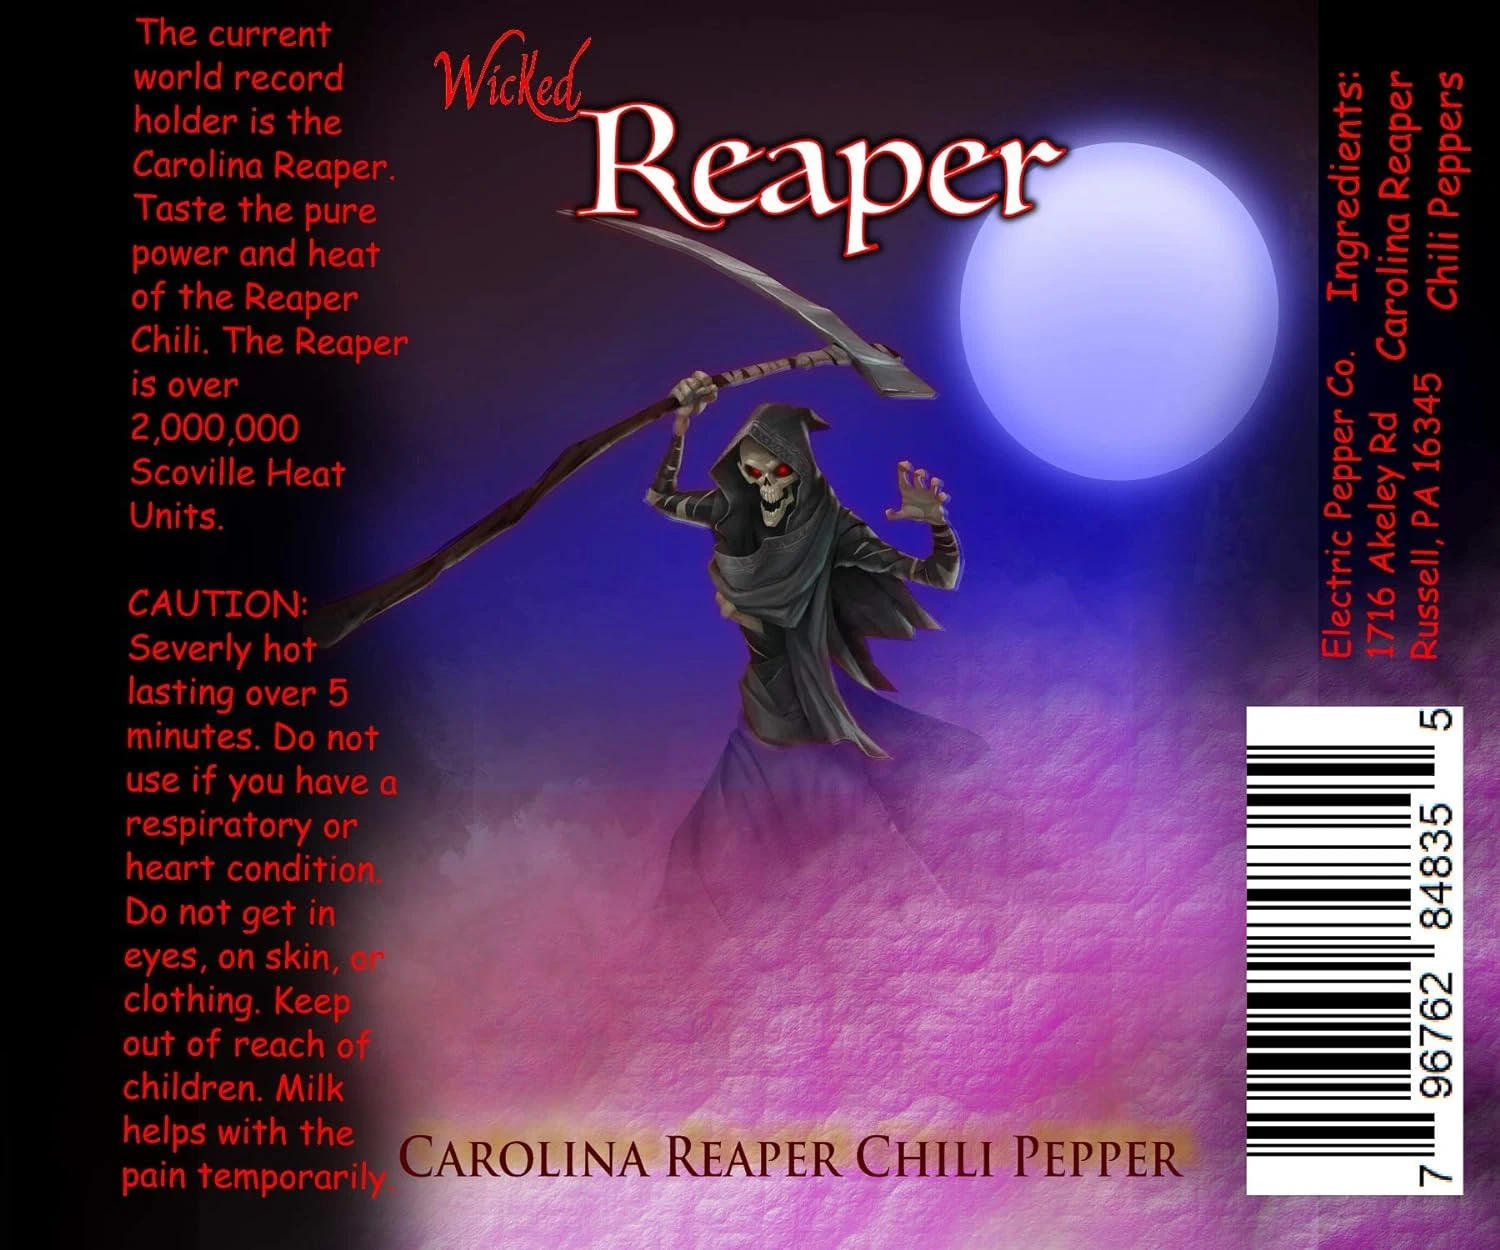 Product Label For Wicked Reaper Reaper Powder